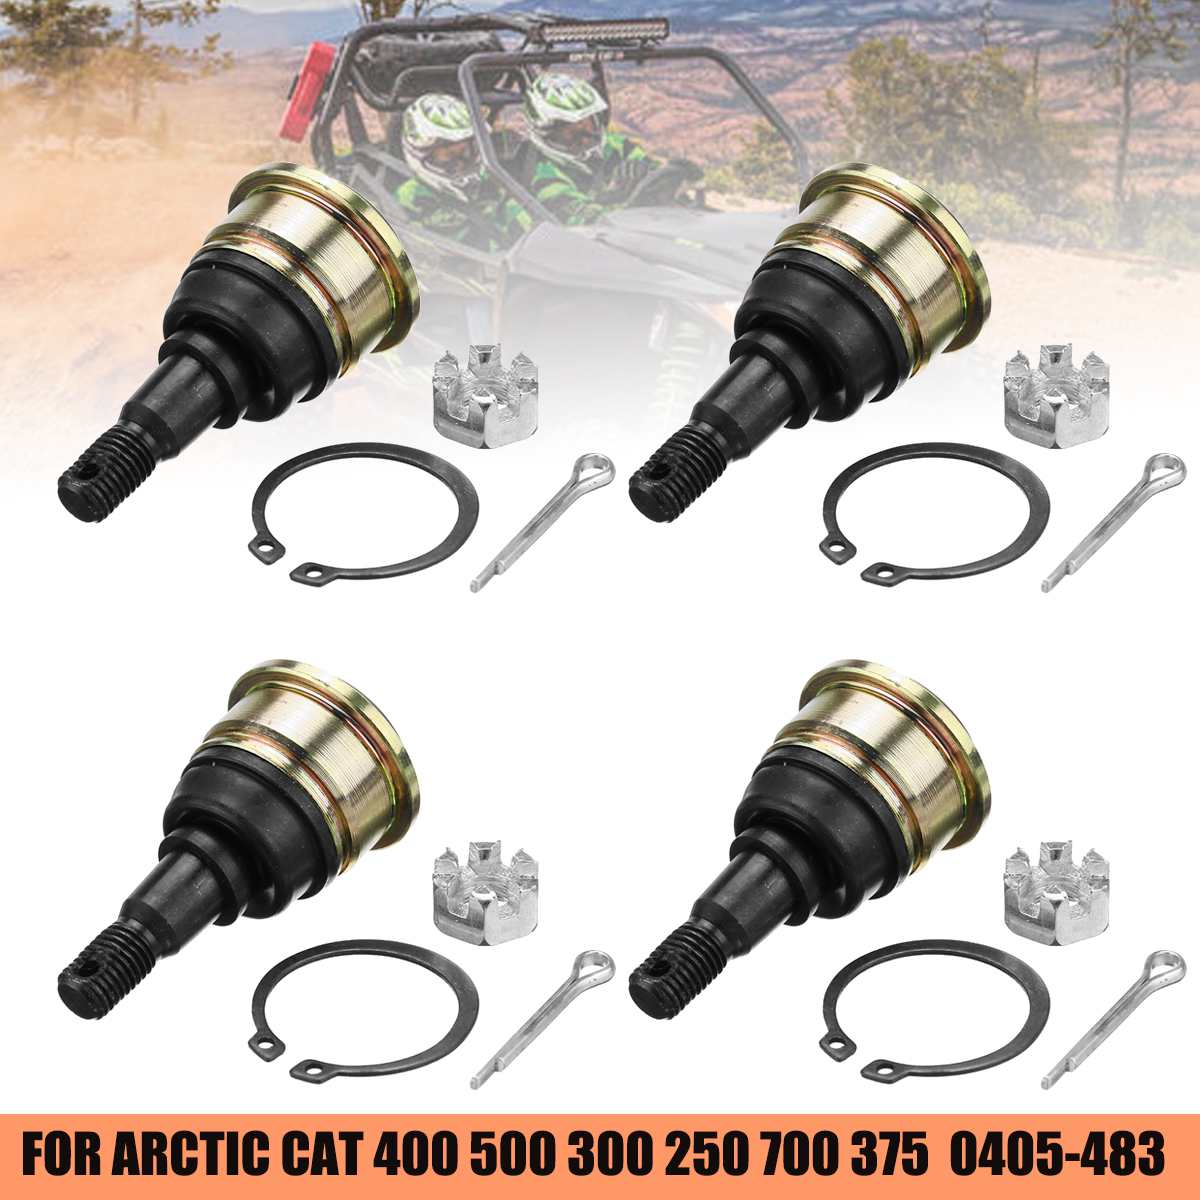 4PC Carbman Ball Joint Tie Rod End Kit for for Arctic Cat 0405-483 400 500 300 250 700 375 Upper Lower